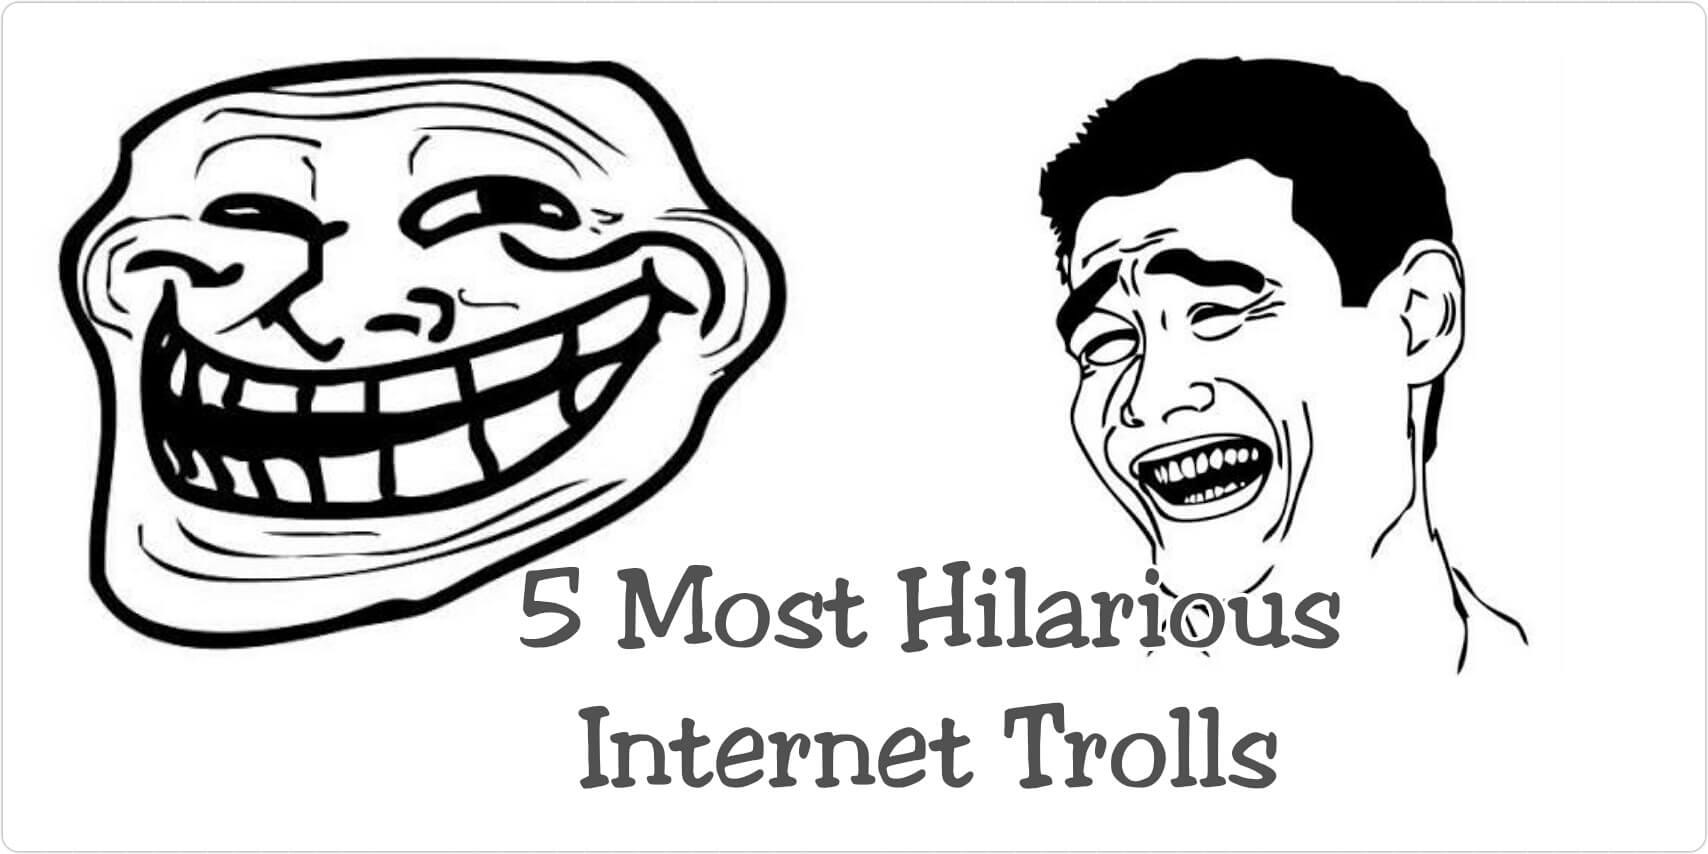 Here's how you feel about internet trolling, based on your personality type